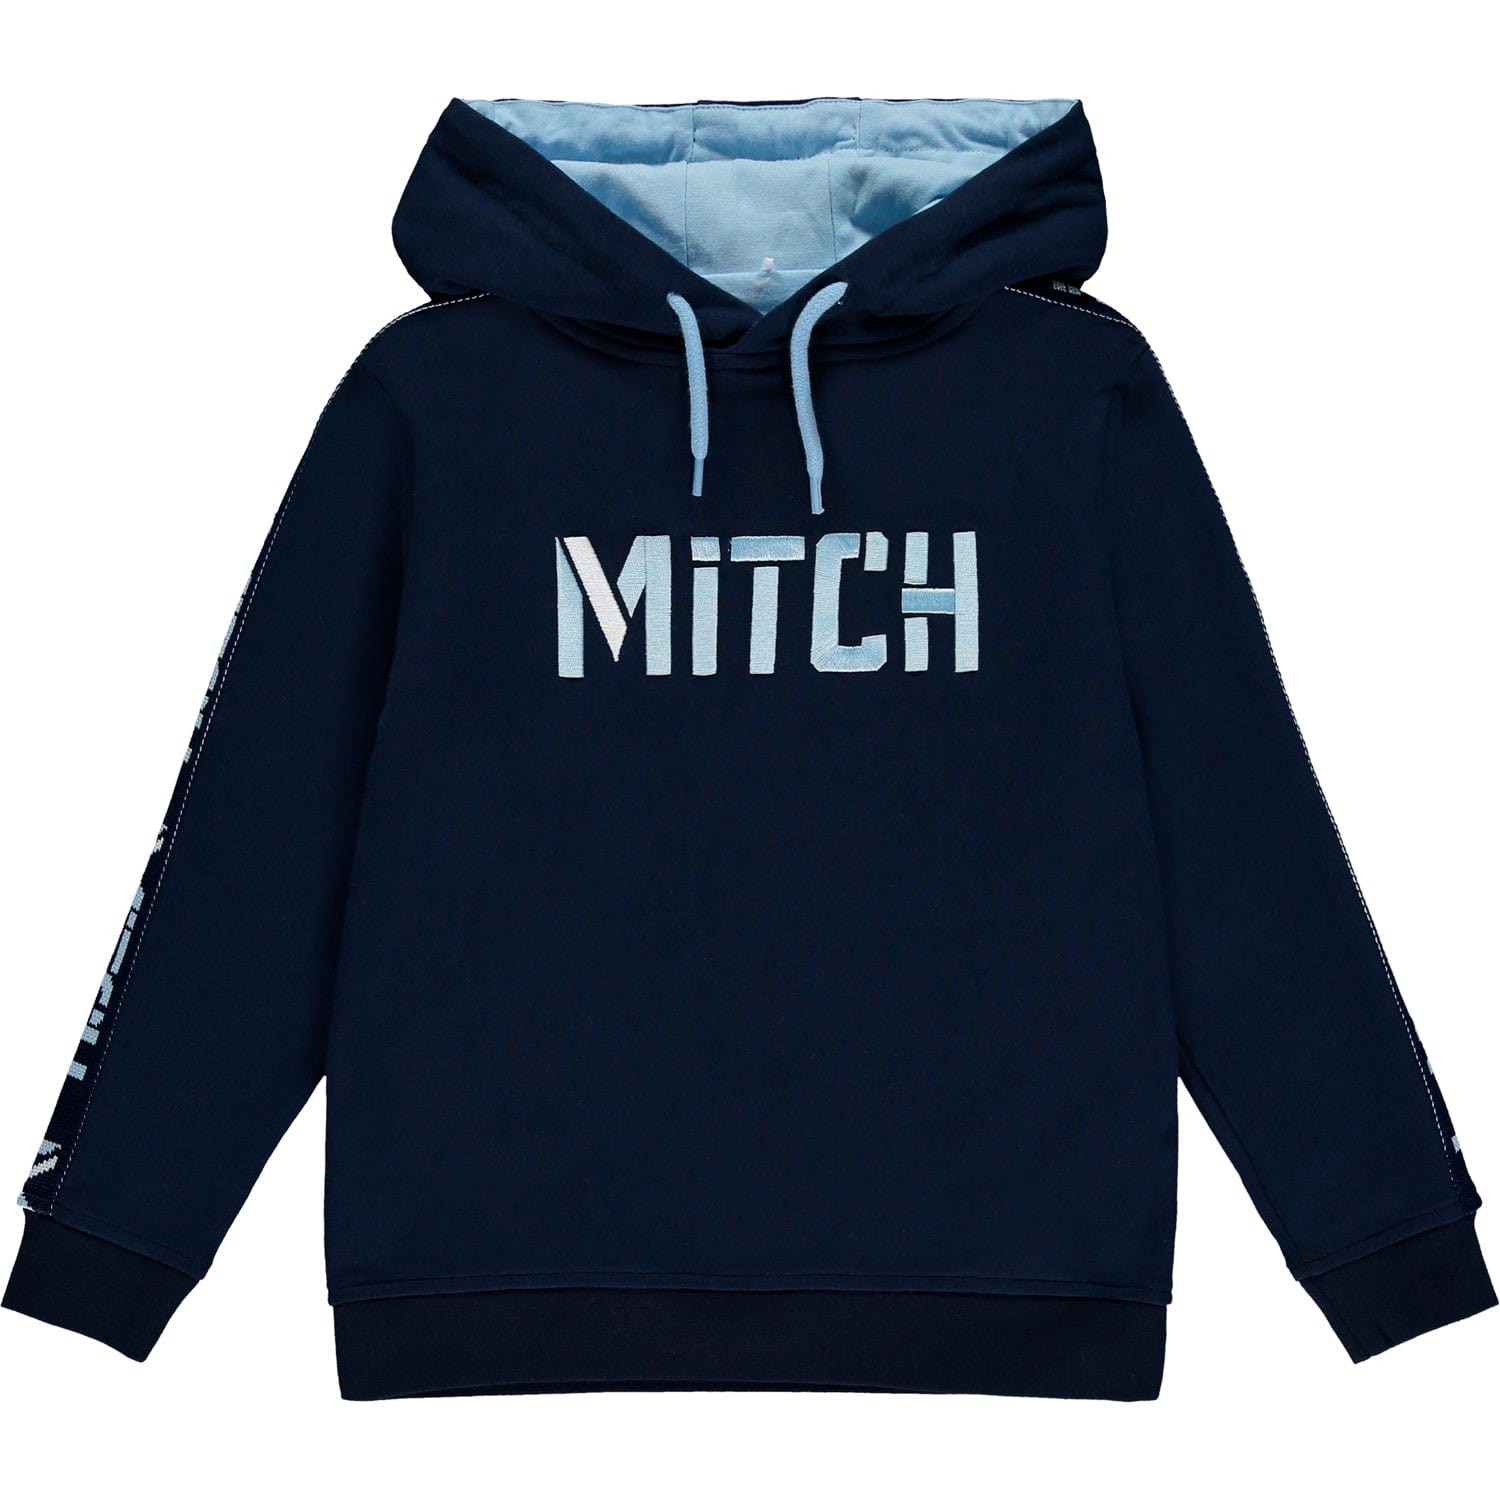 MITCH - Hamilton Hooded Tape Tracksuit - Blue Navy